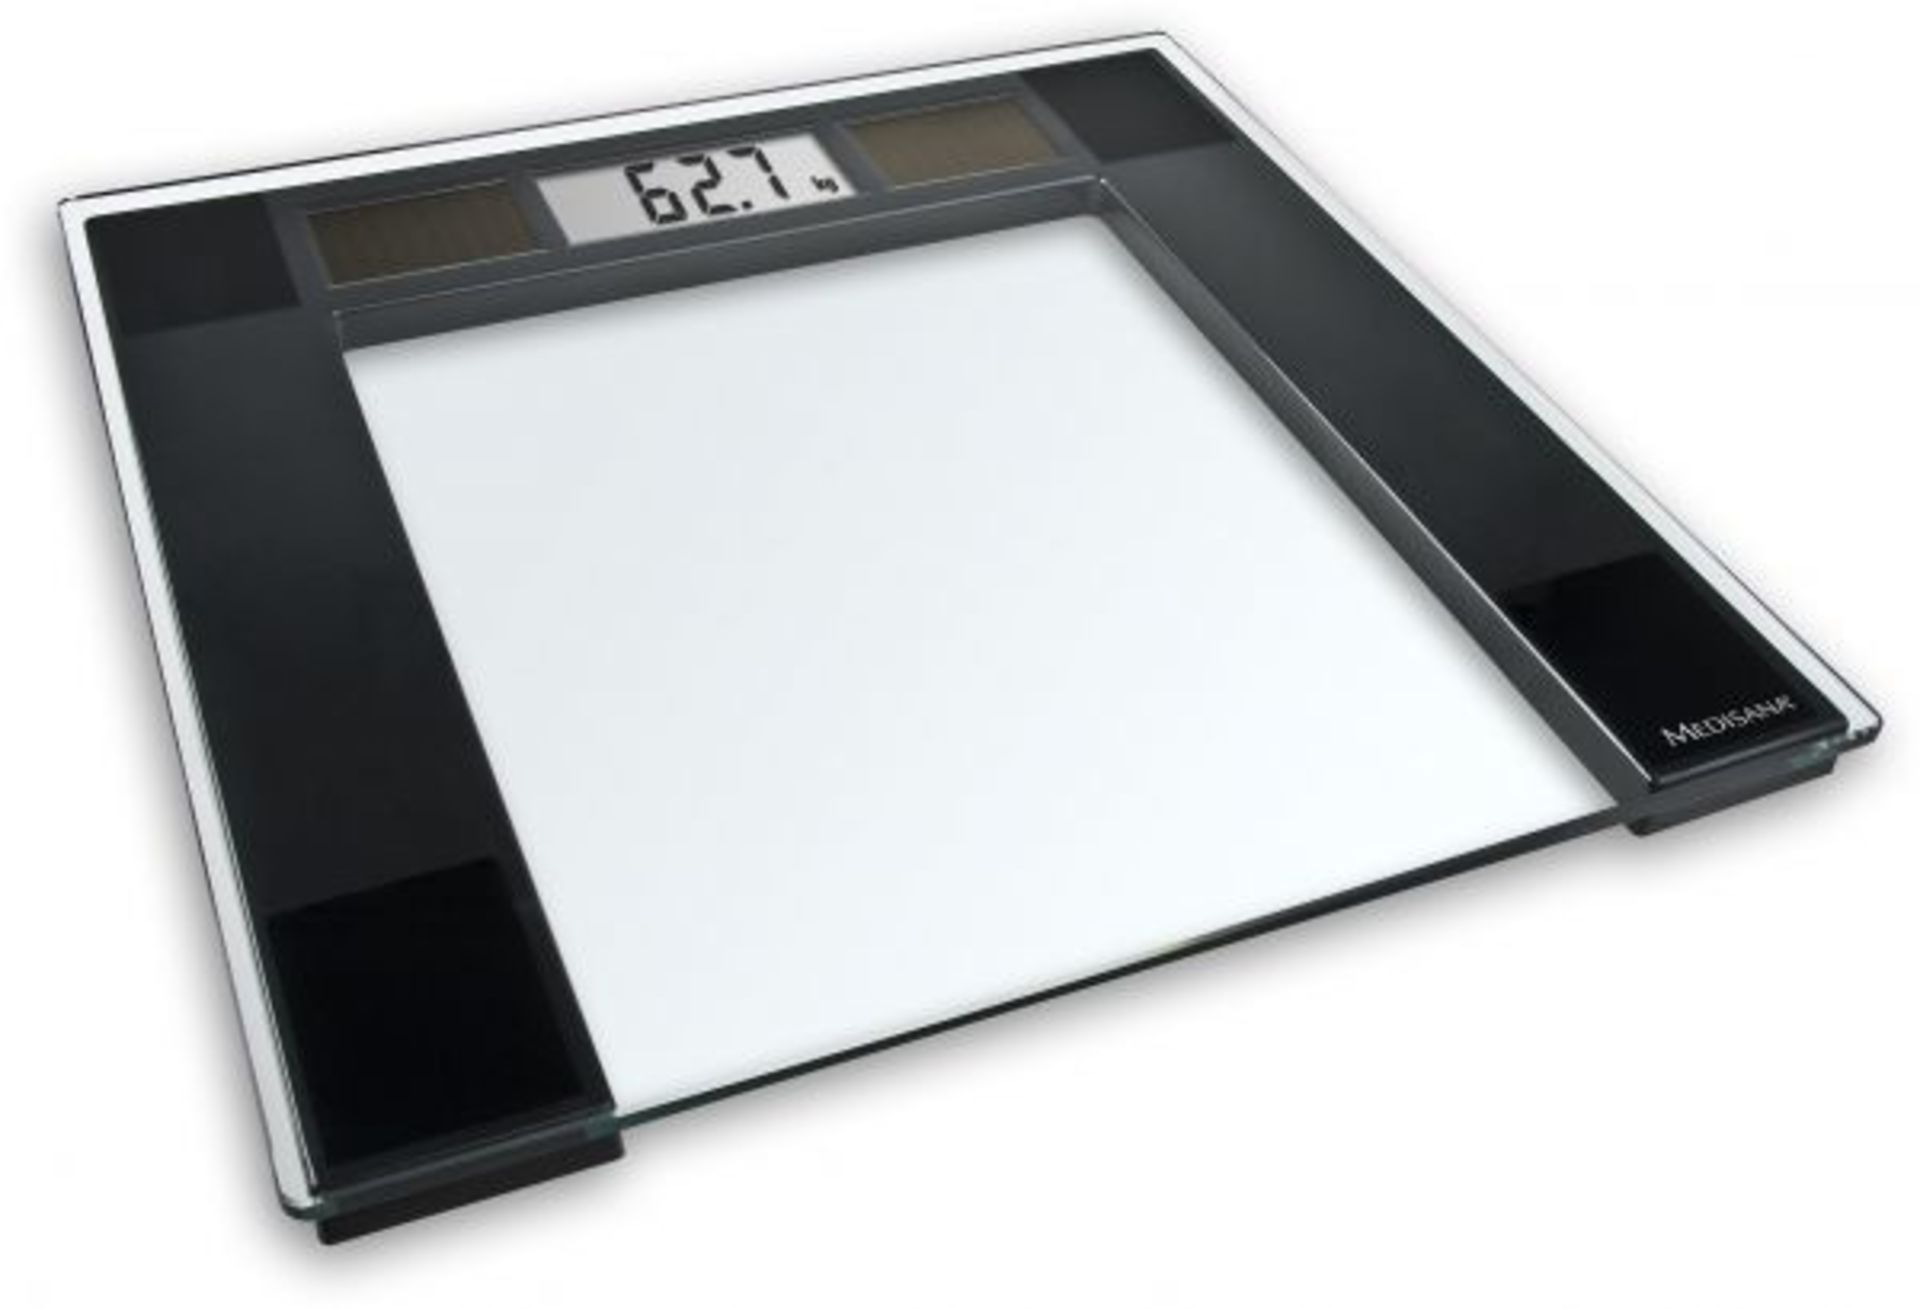 V *TRADE QTY* Brand New Medisana Solar Powered Personal Scales (Max 180kg) Glass Topped SRP29.99 X 4